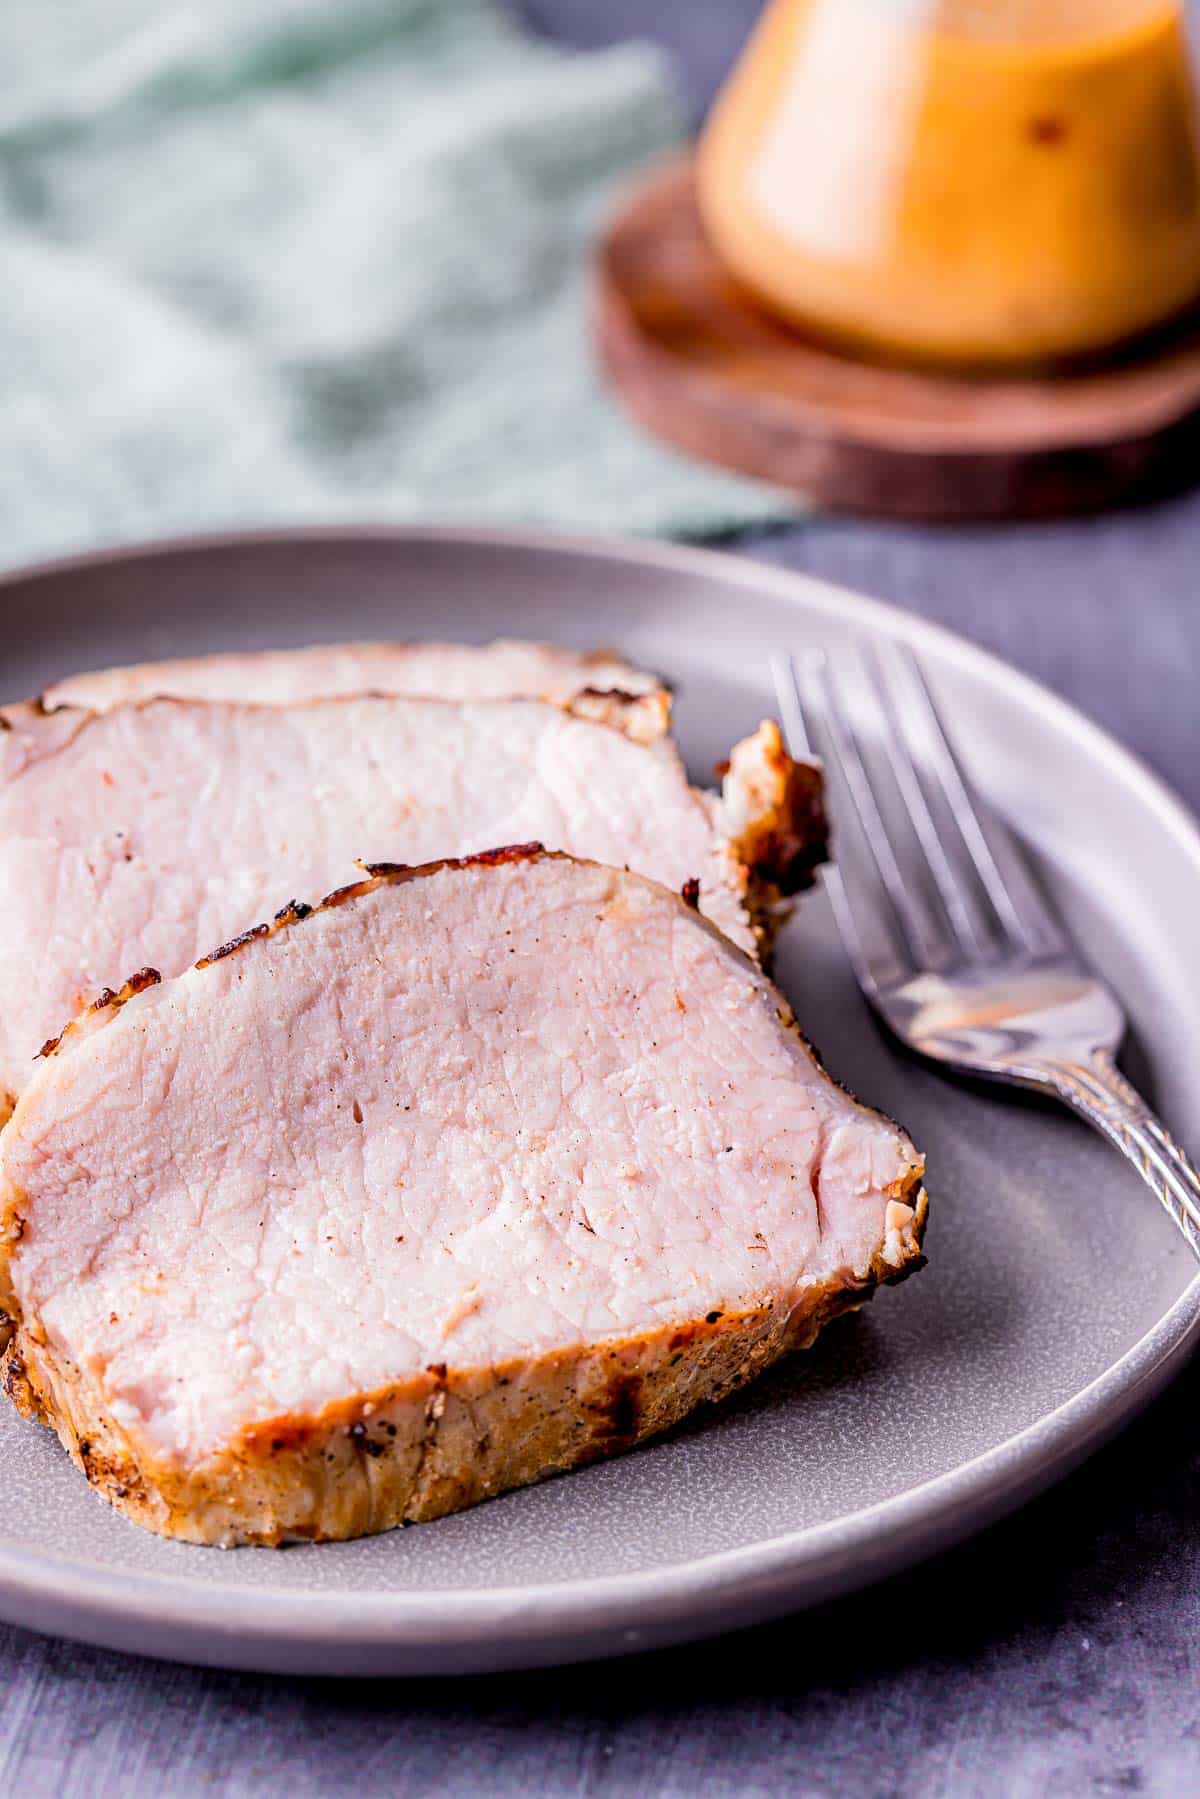 slices of pork on a plate with a fork.